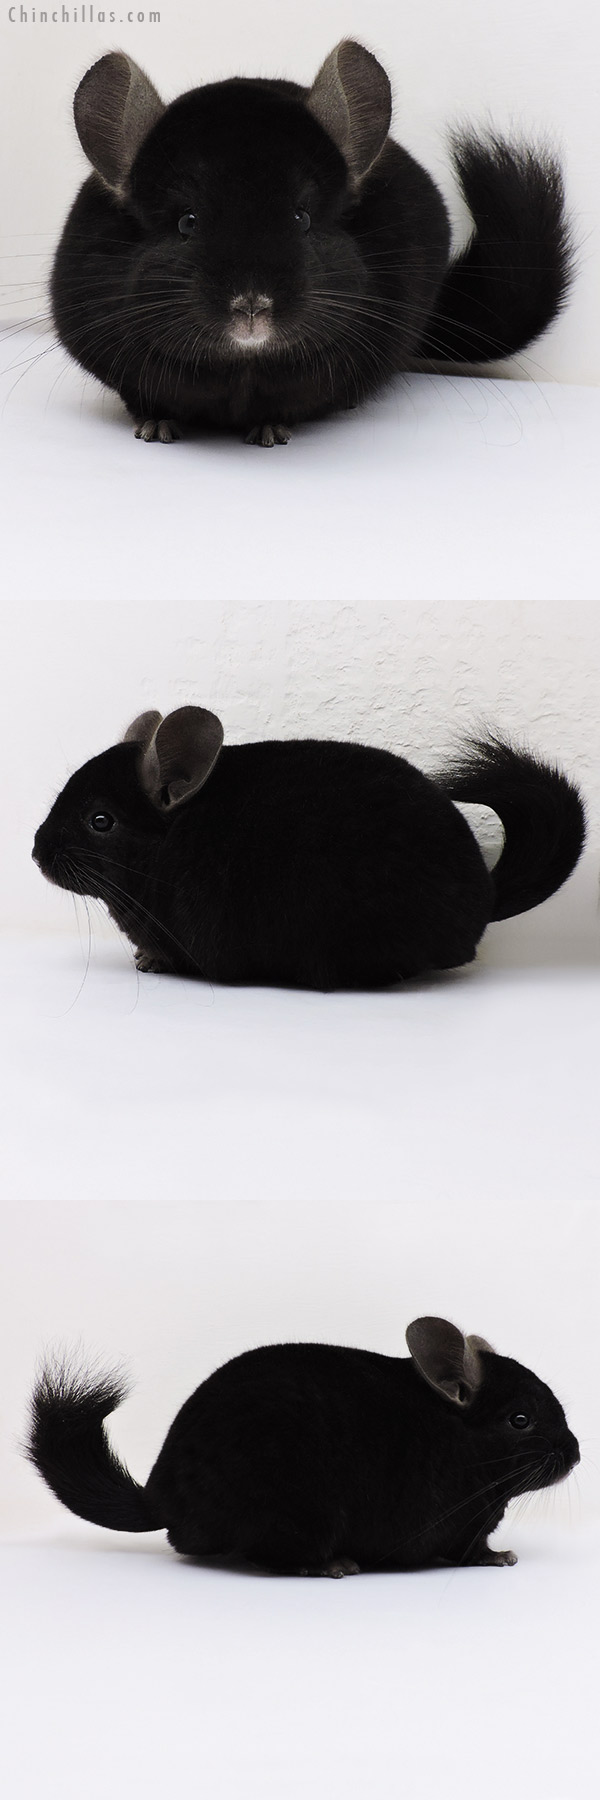 Chinchilla or related item offered for sale or export on Chinchillas.com - 17058 Large Blocky Ebony ( Locken Carrier ) Male Chinchilla